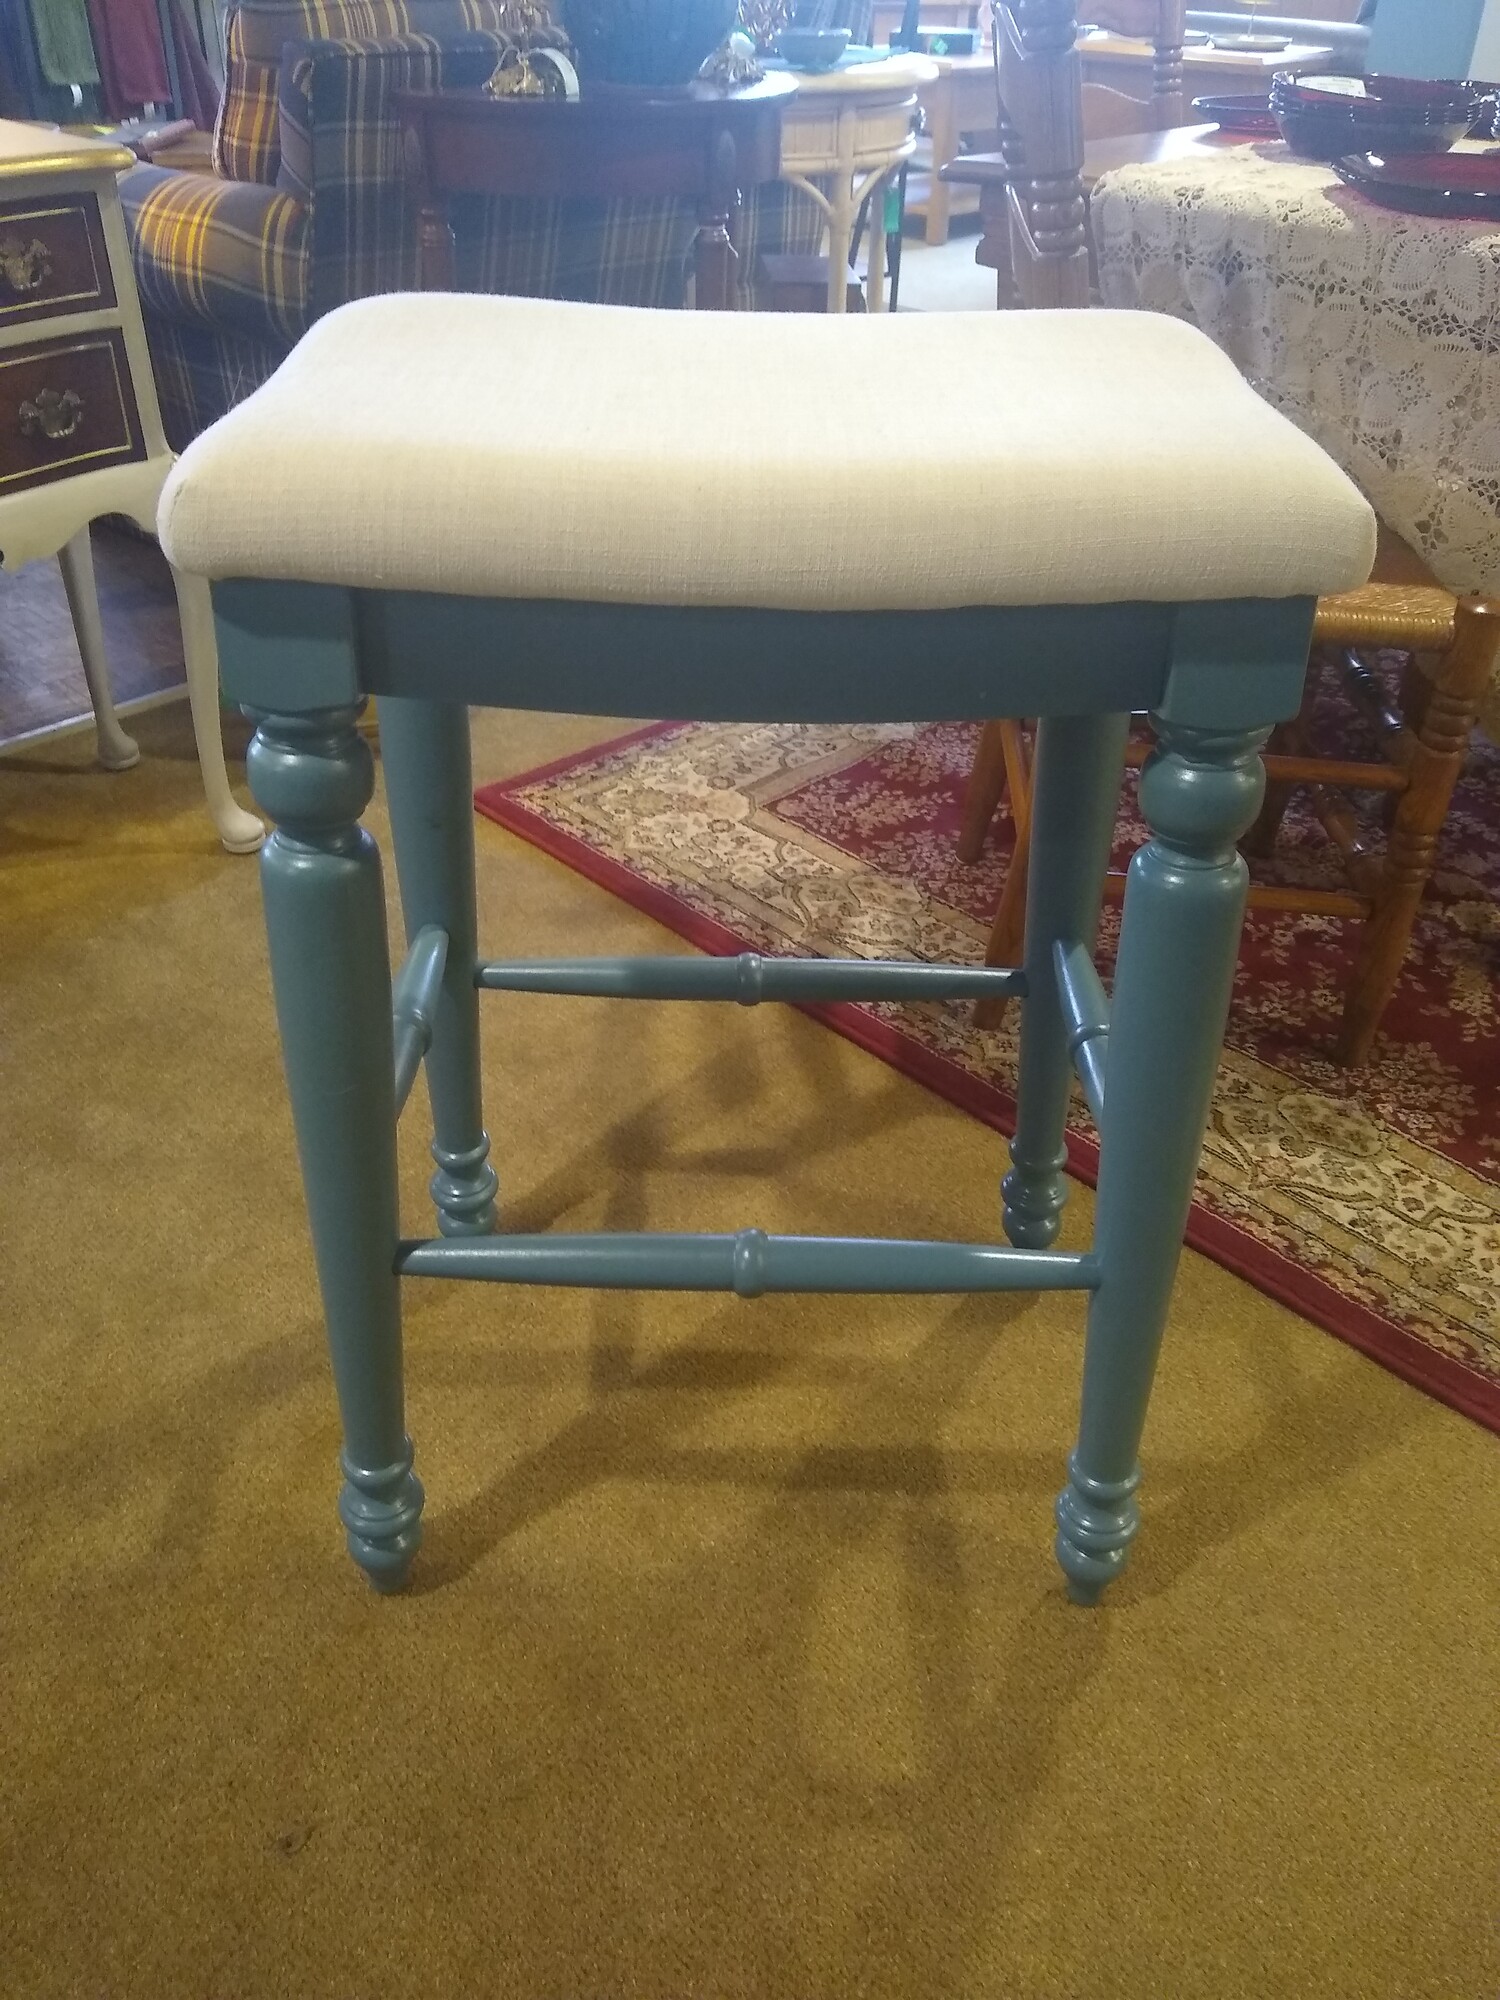 Upholstered Saddle Stool

Off white upholstered saddle stool with painted blue wood base.

Size: 20 in wide X 14 in deep X 29 in high